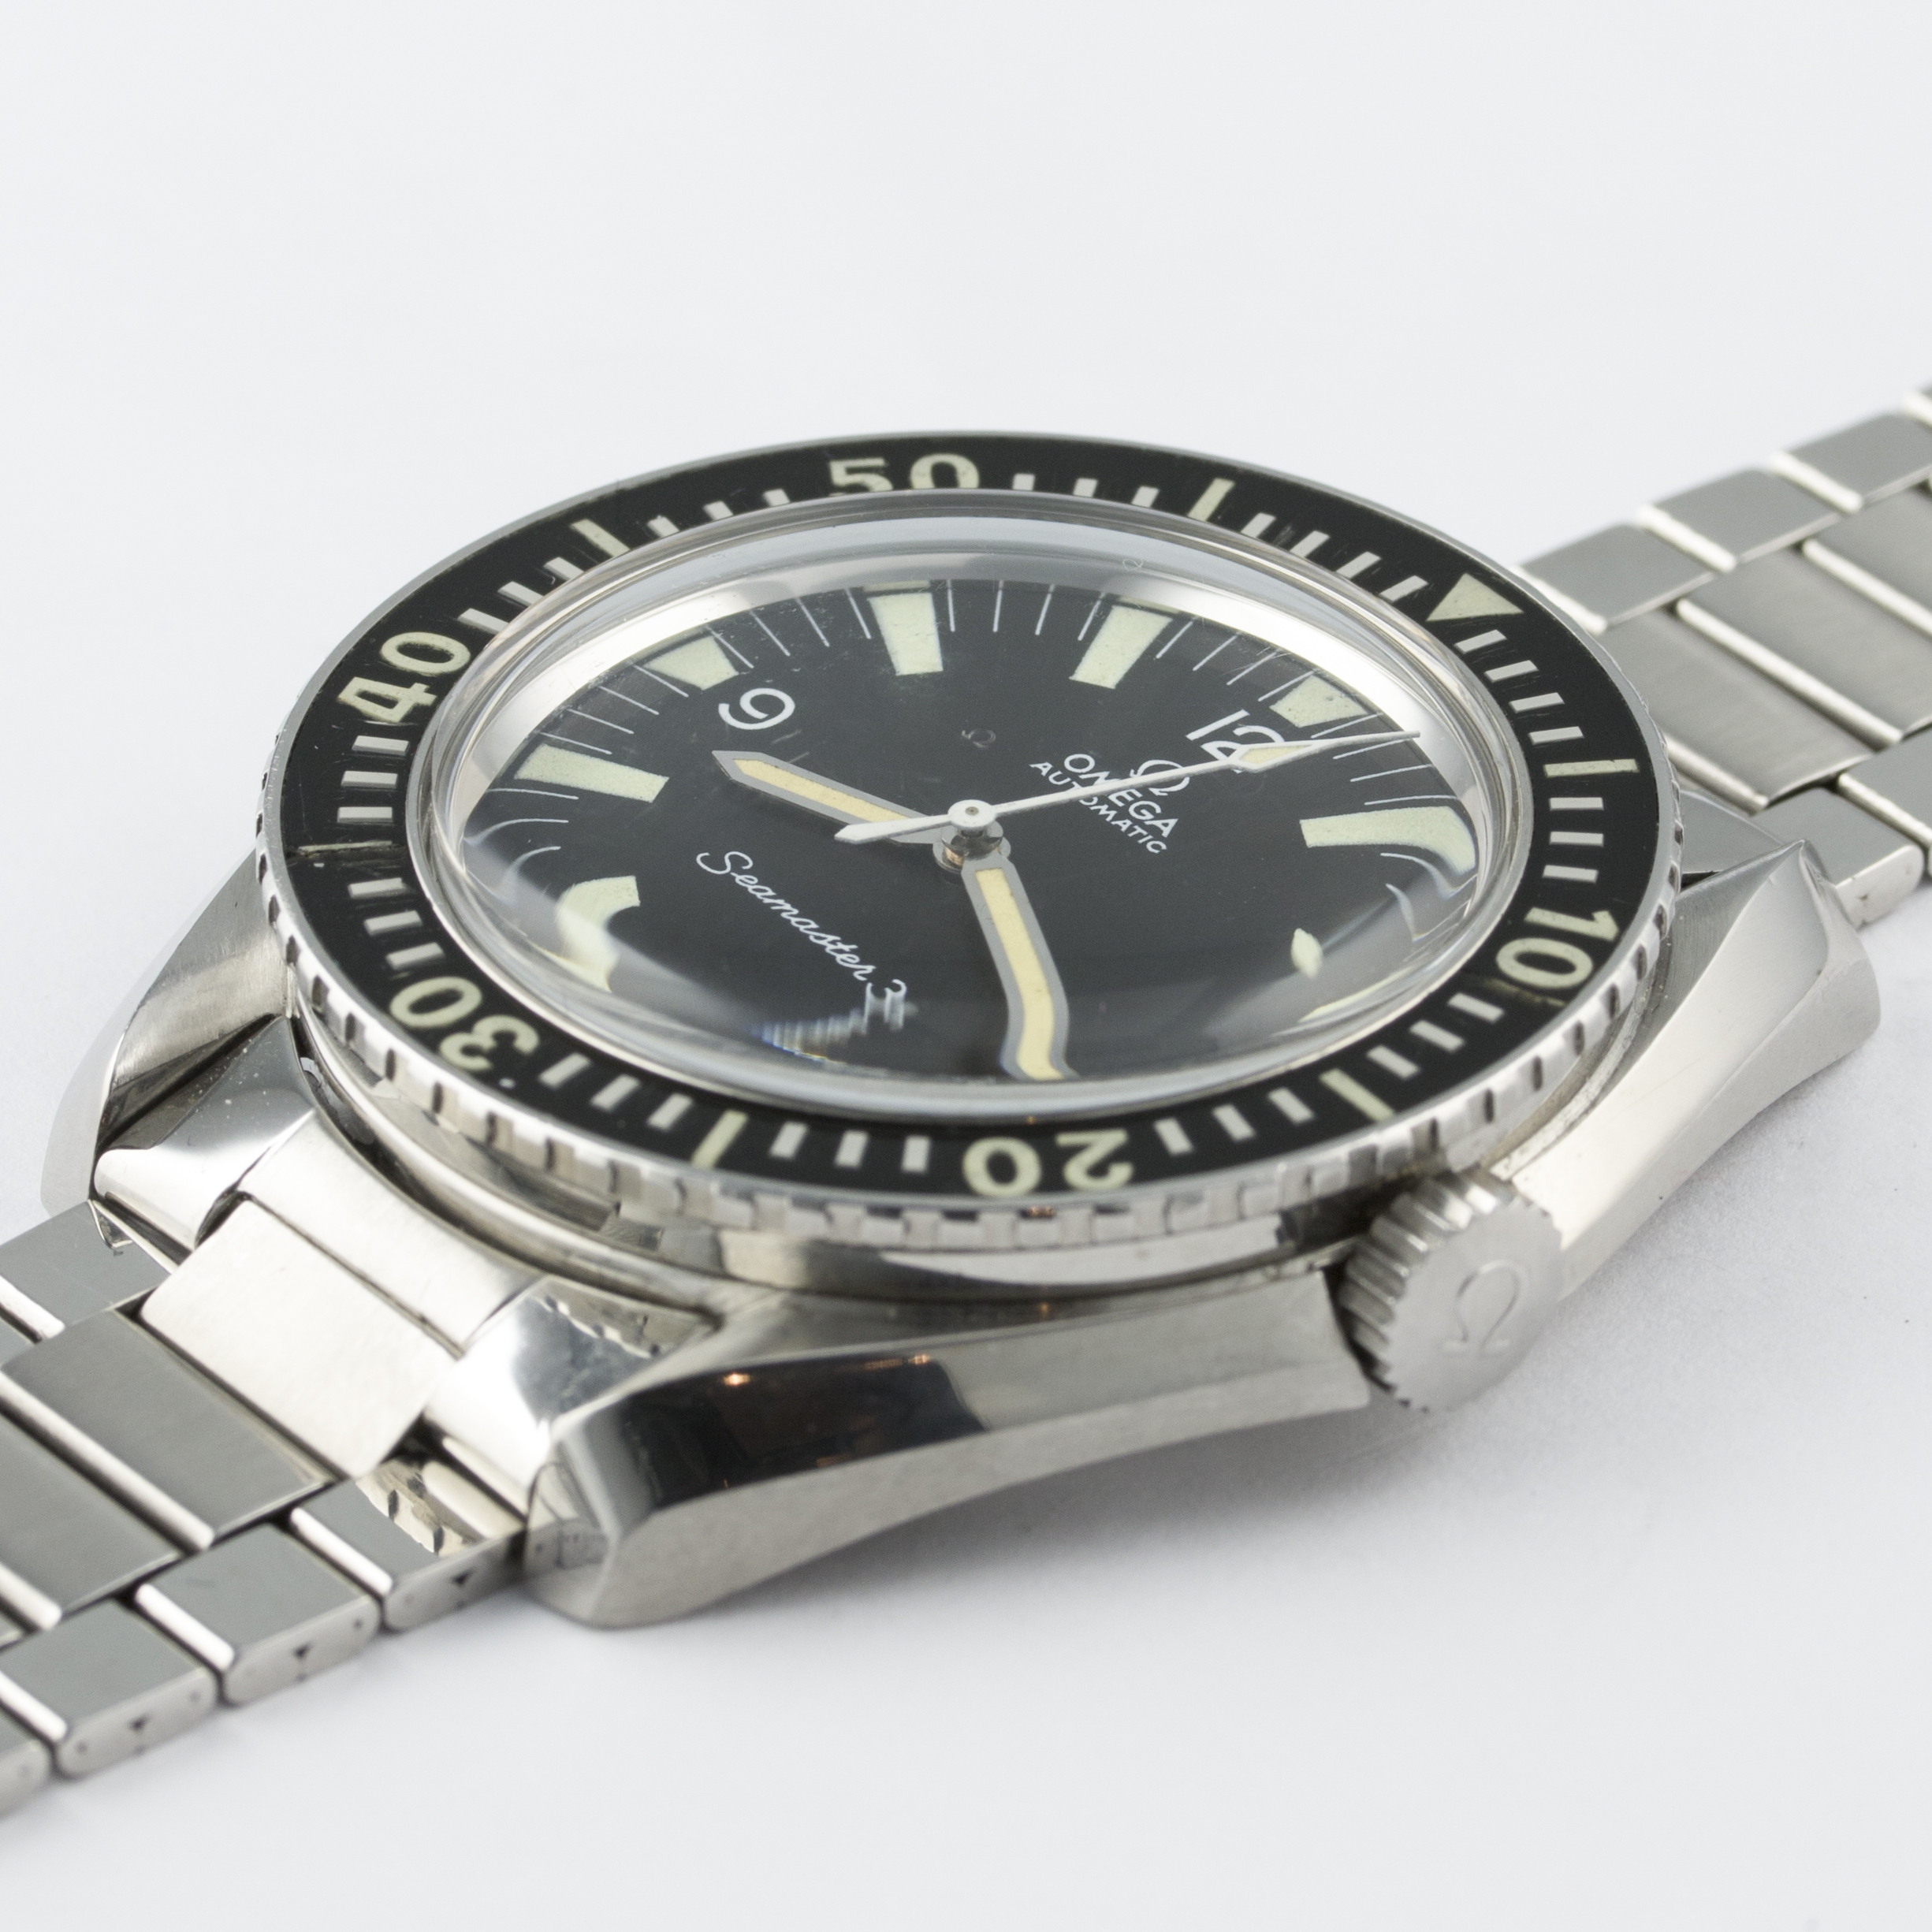 A RARE GENTLEMAN'S STAINLESS STEEL OMEGA SEAMASTER 300 BRACELET WATCH CIRCA 1967, REF. 165.024 D: - Image 4 of 10